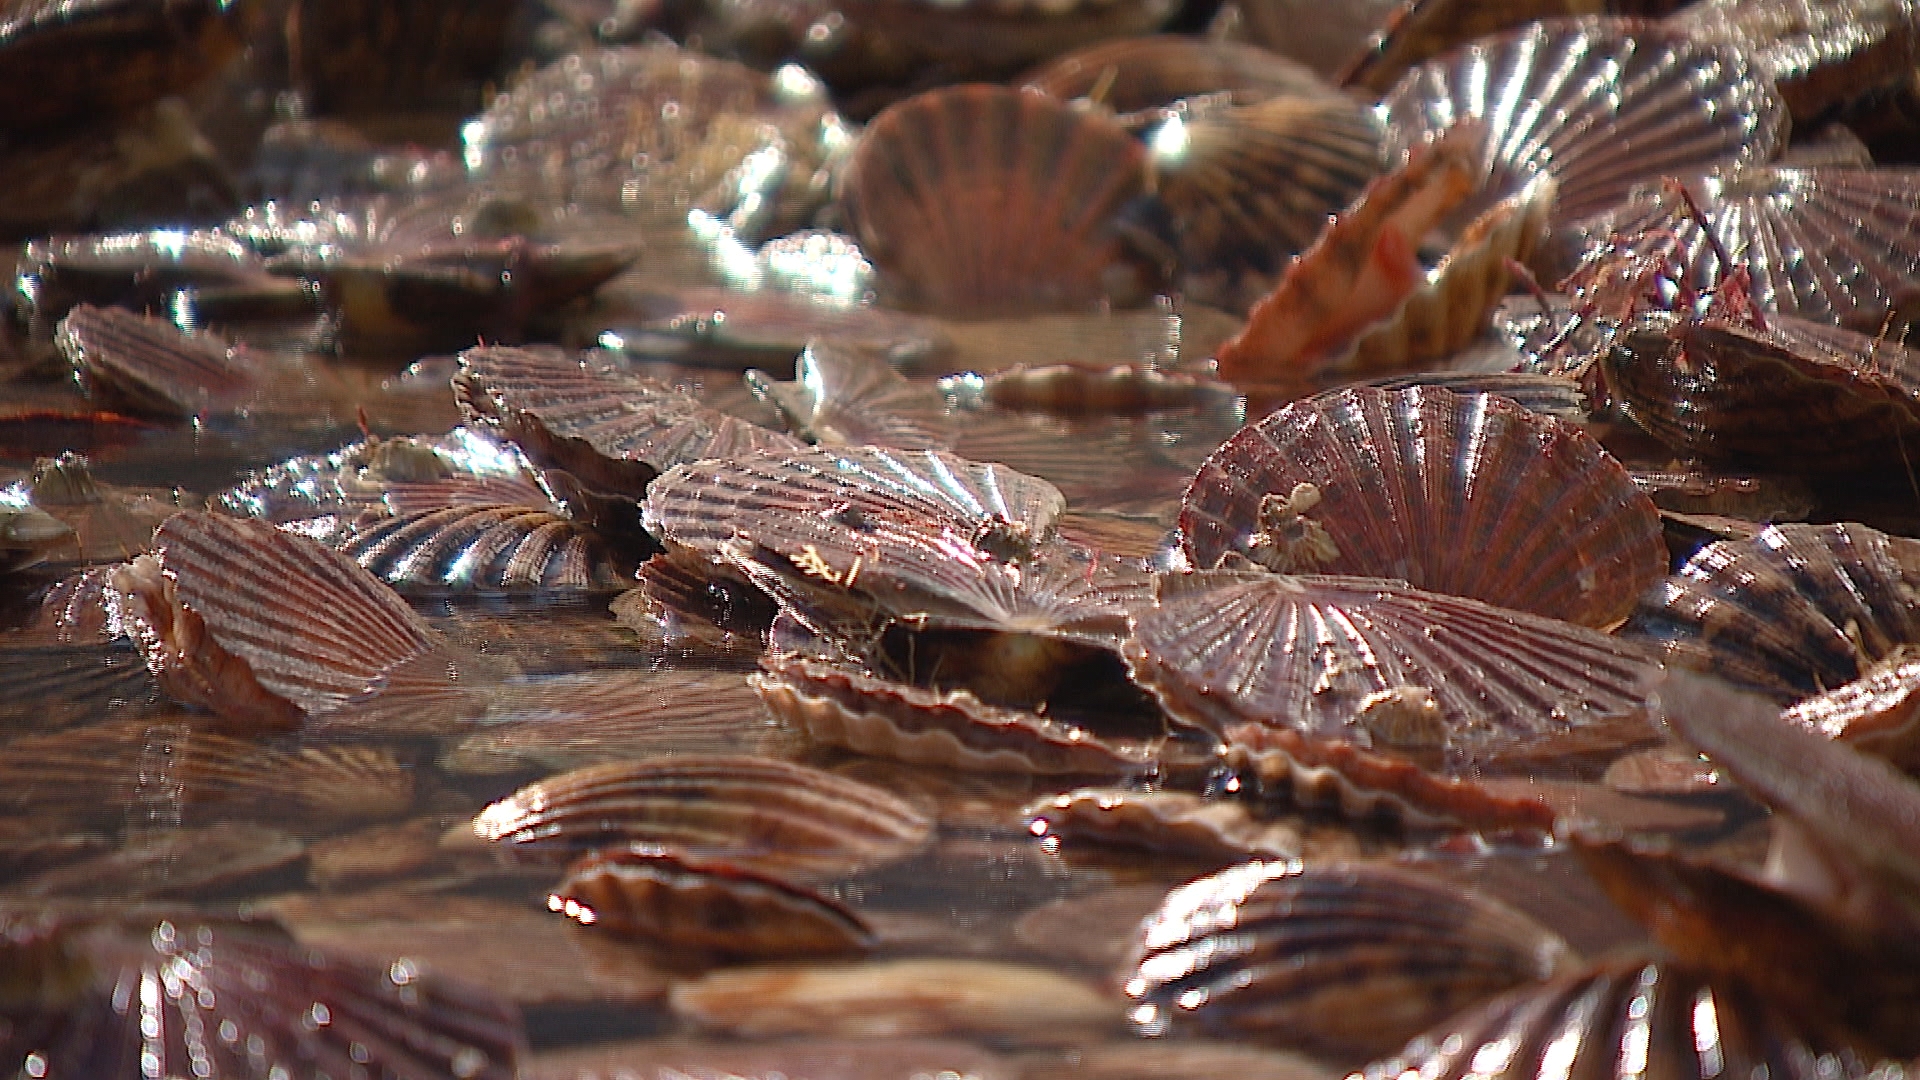 Live scallops at Loch Fyne Seafarms in Tarbert. <strong>(STV News)</strong>” /><span class=